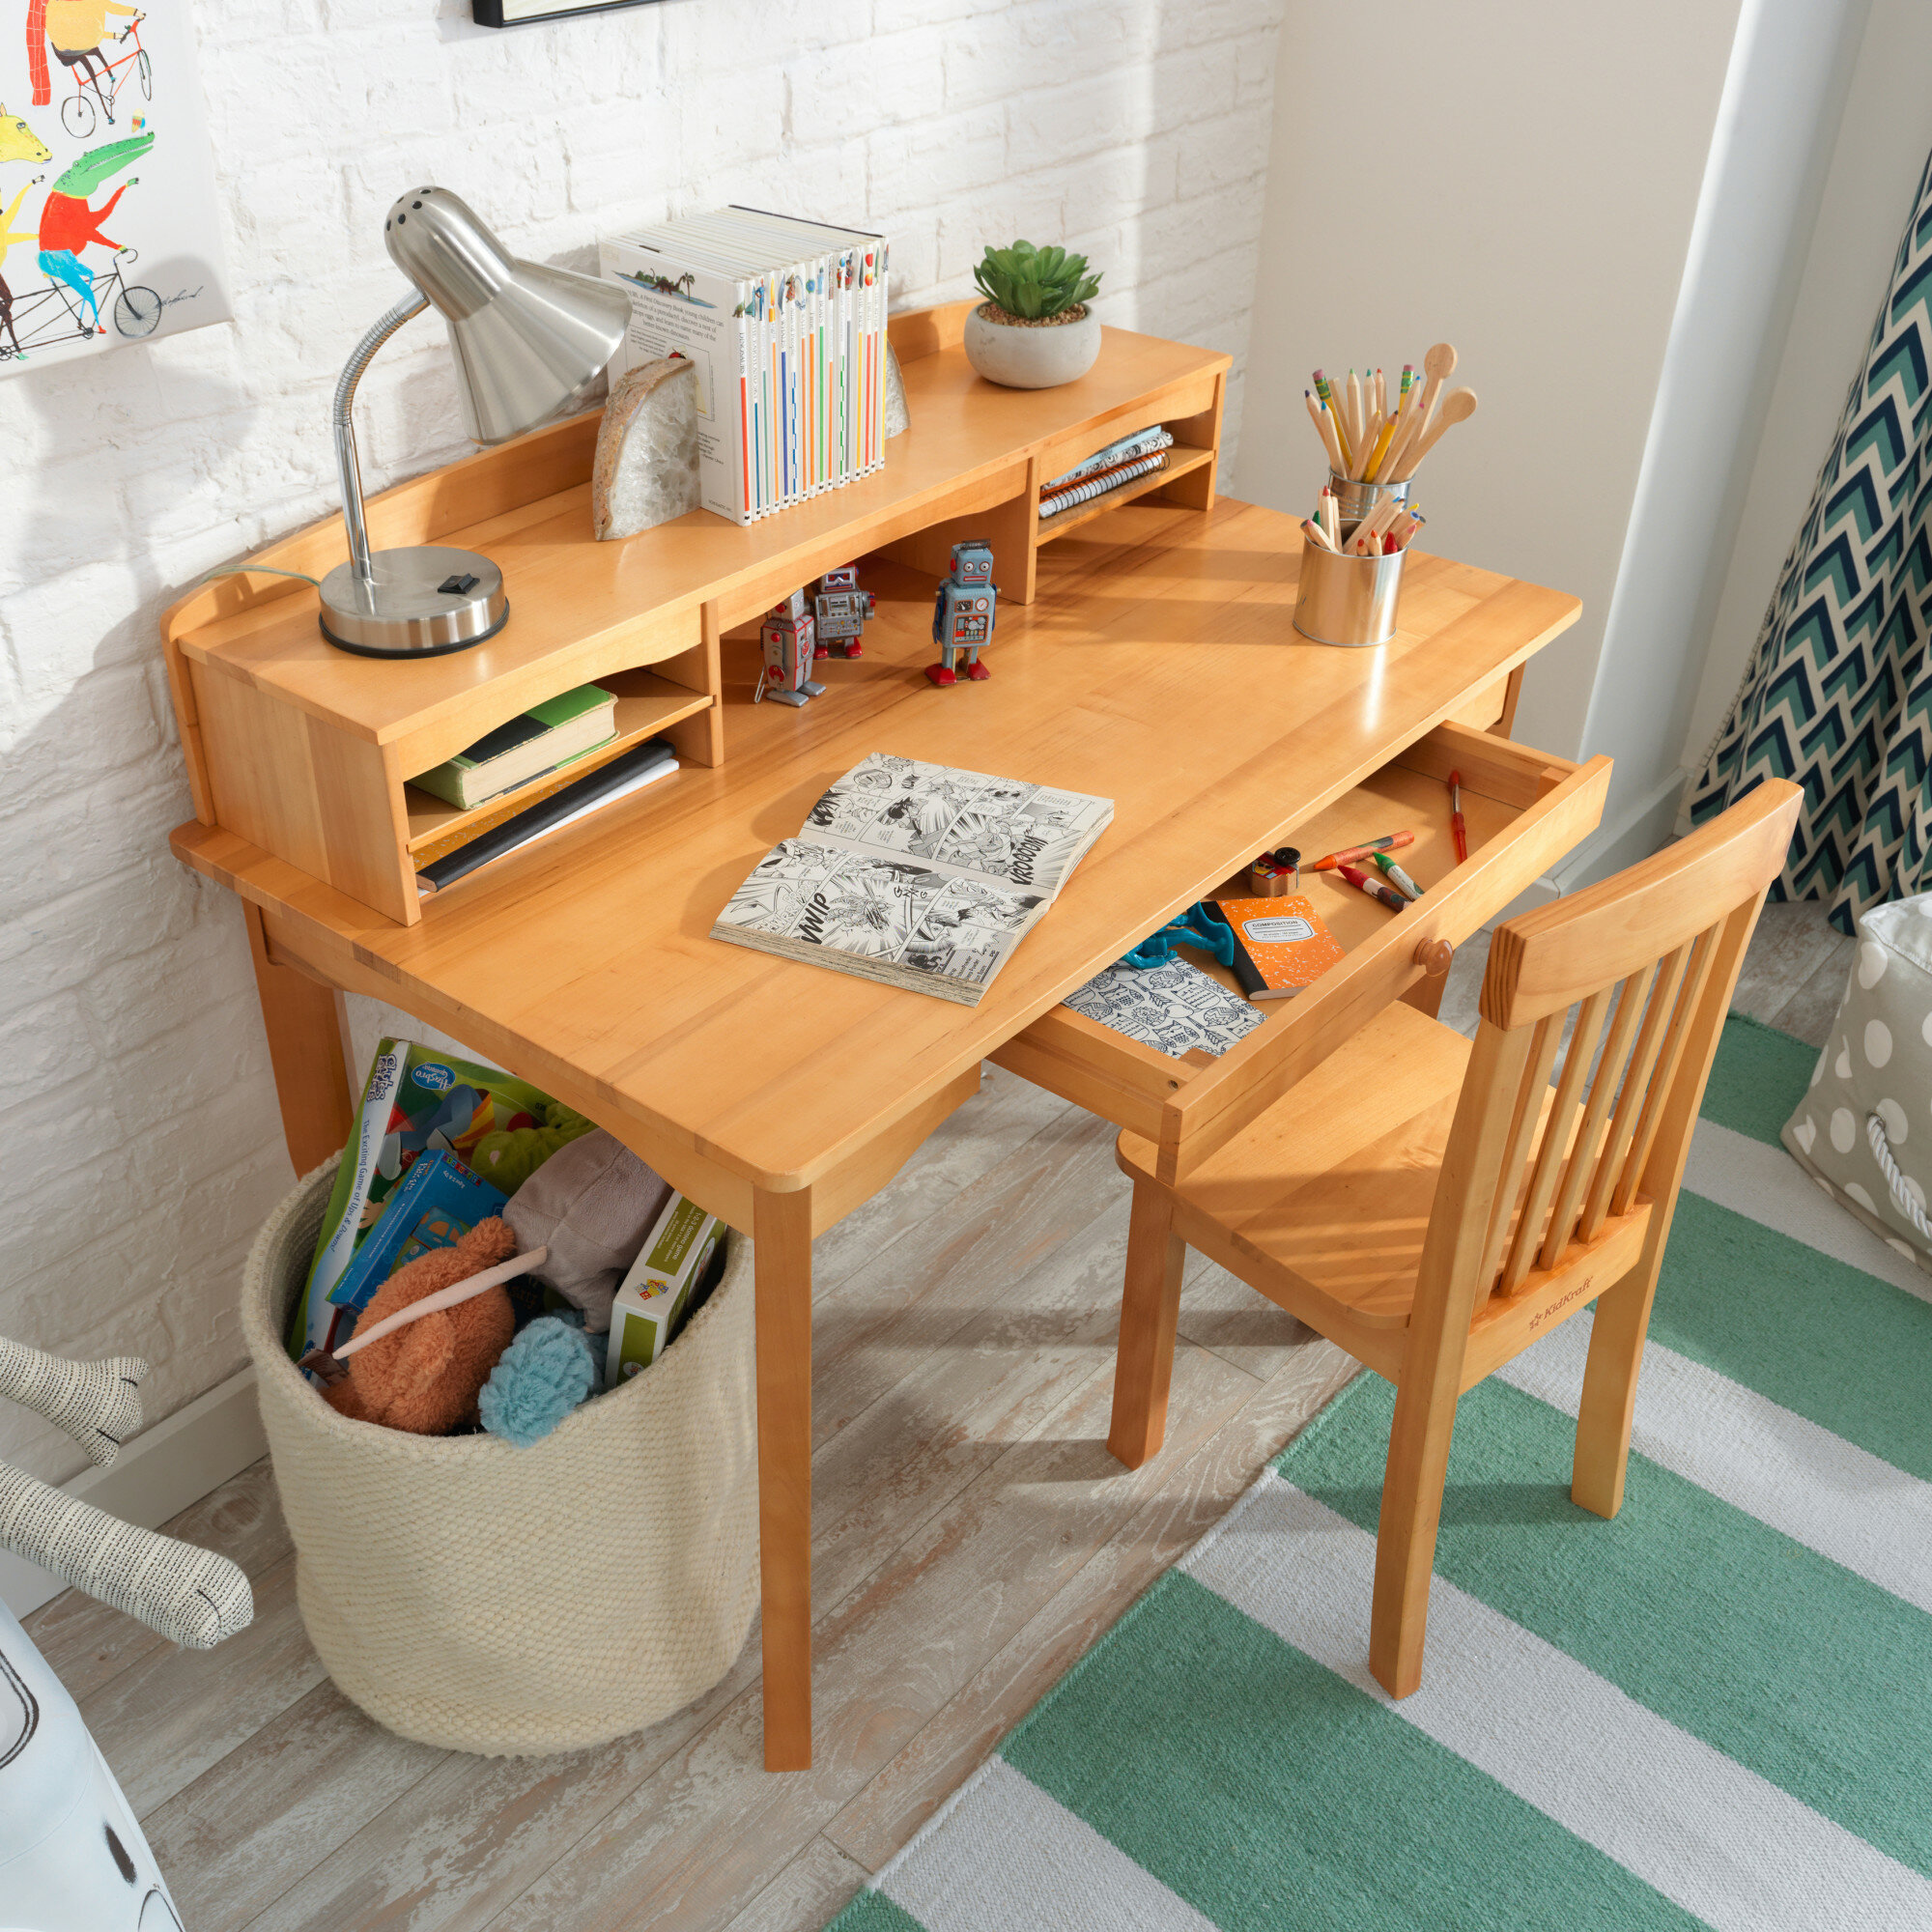 Details about   Kids Table 4 Chairs Set Play Snack Area Espresso Wood Color Room Furniture 